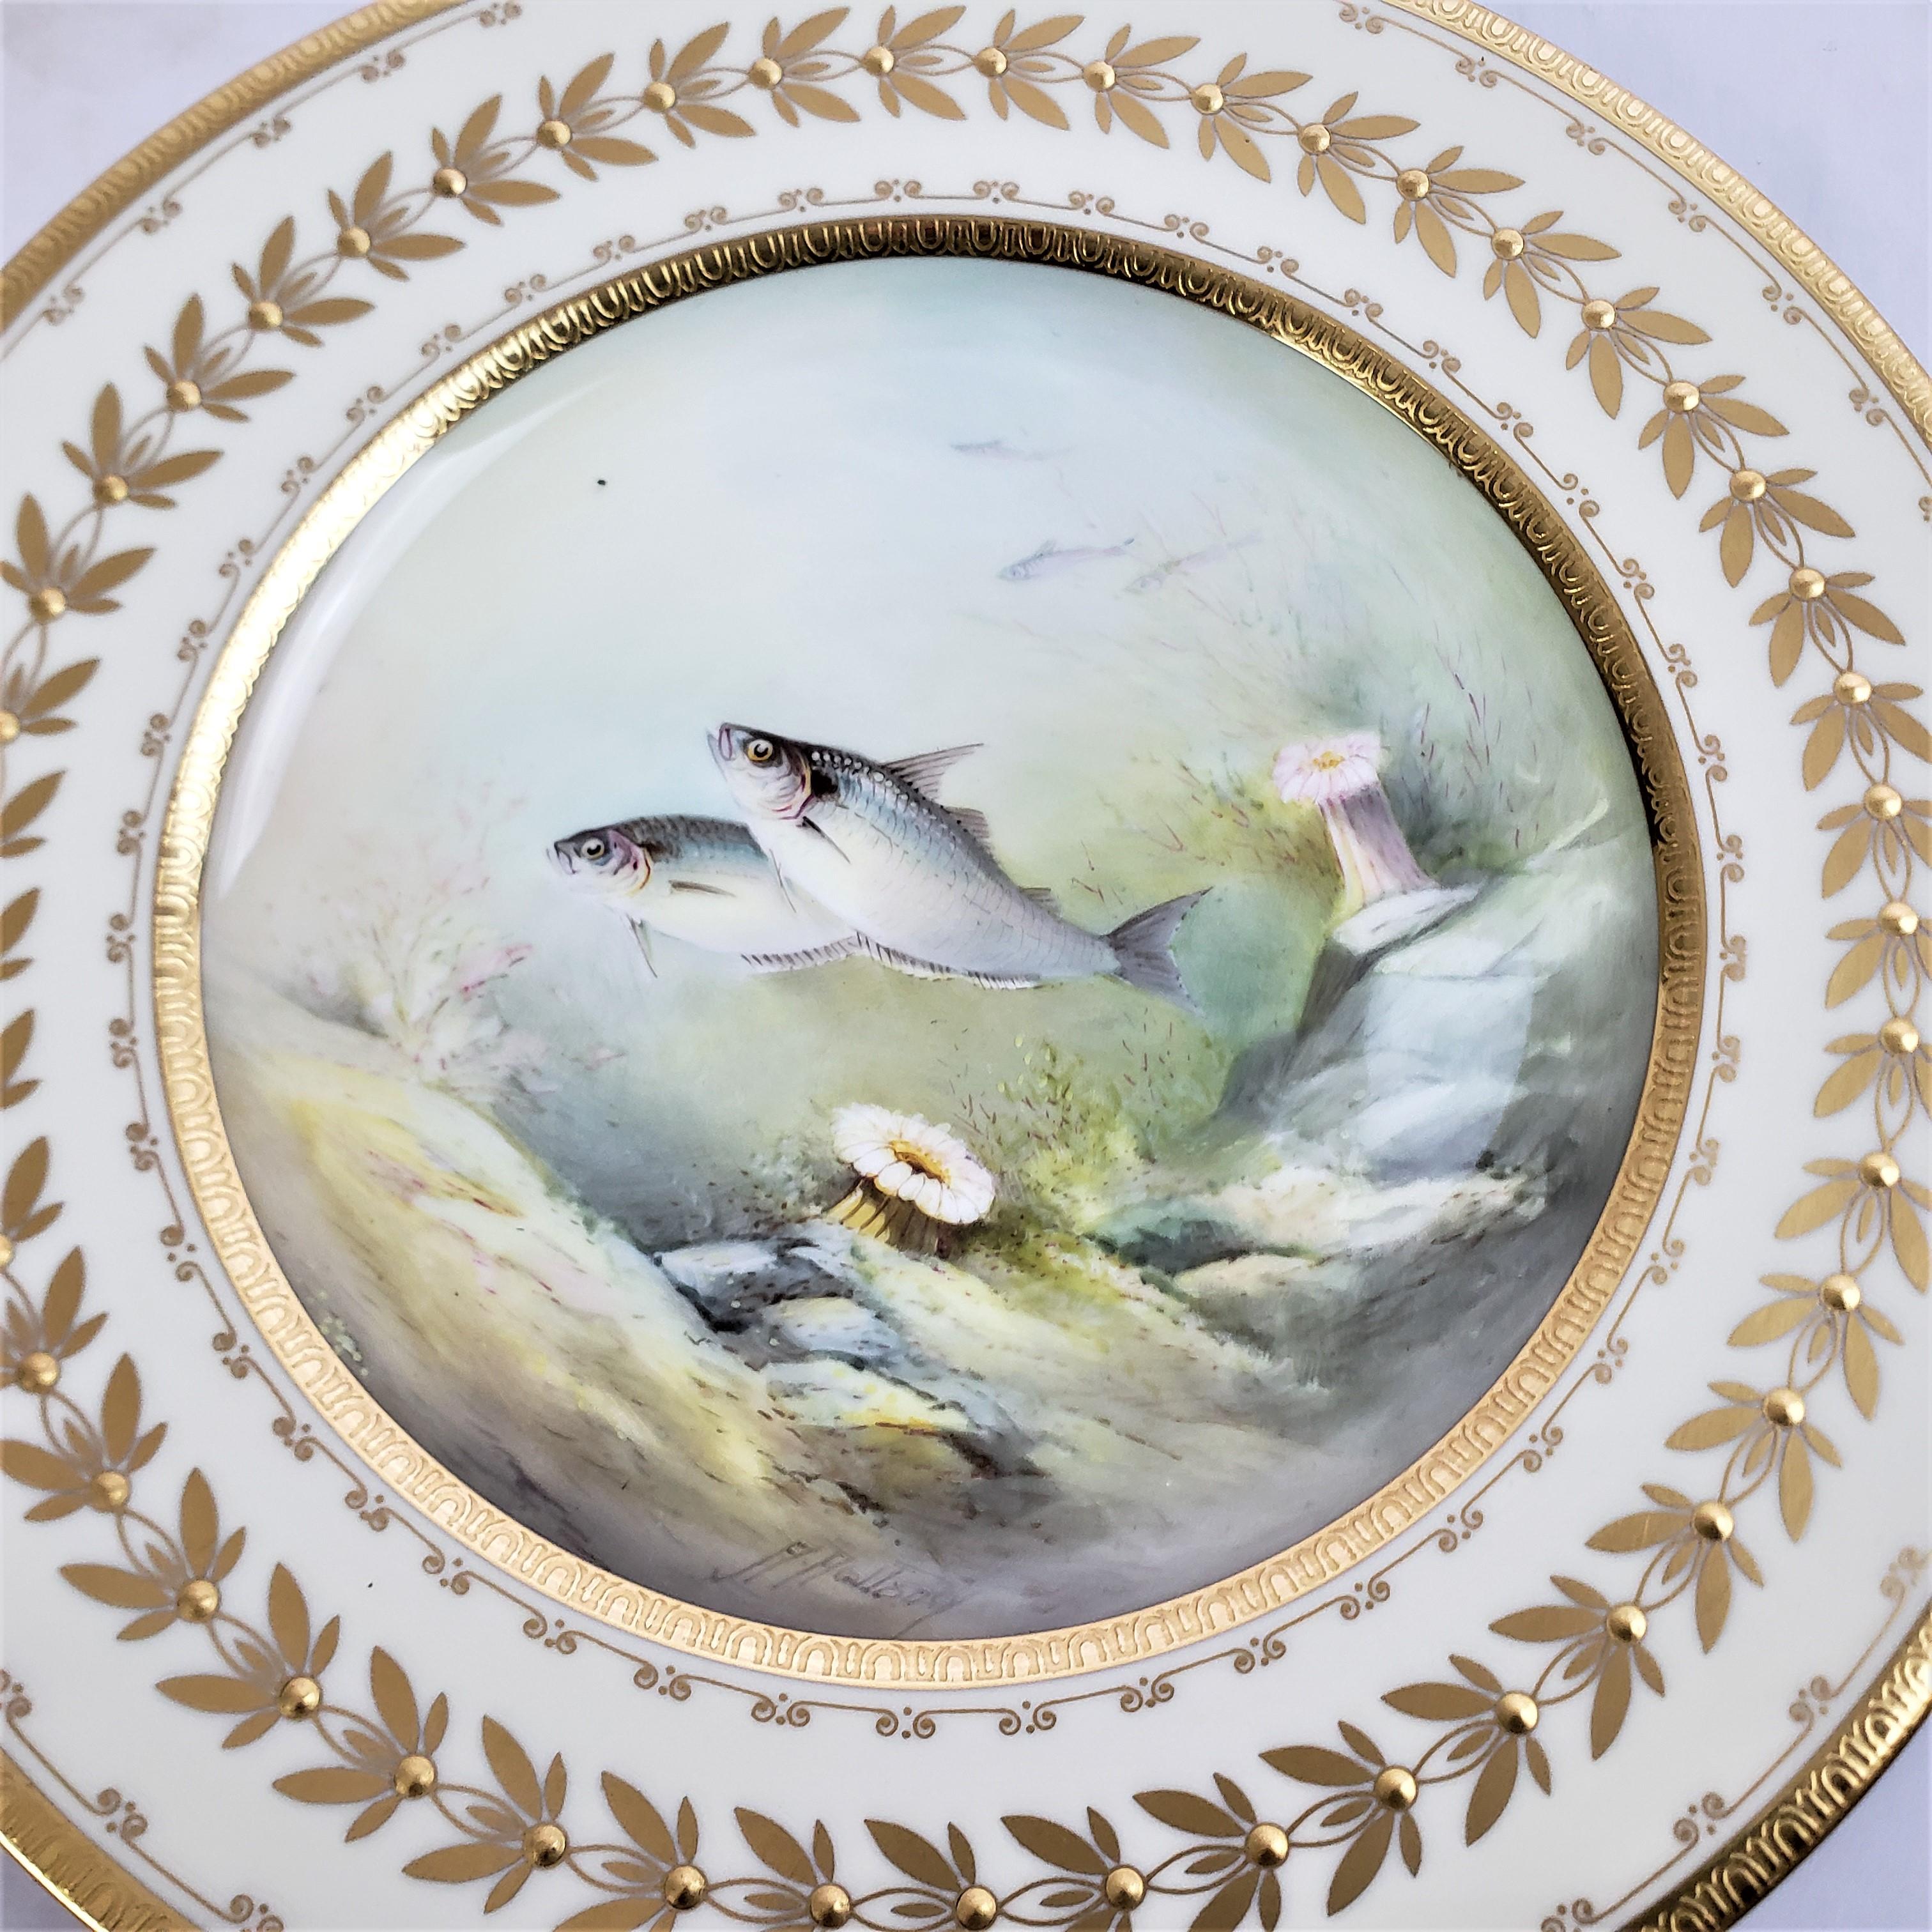 12 Antique Minton Hand-Painted Cabinet Plates Signed A. Holland Depicting Fish For Sale 2